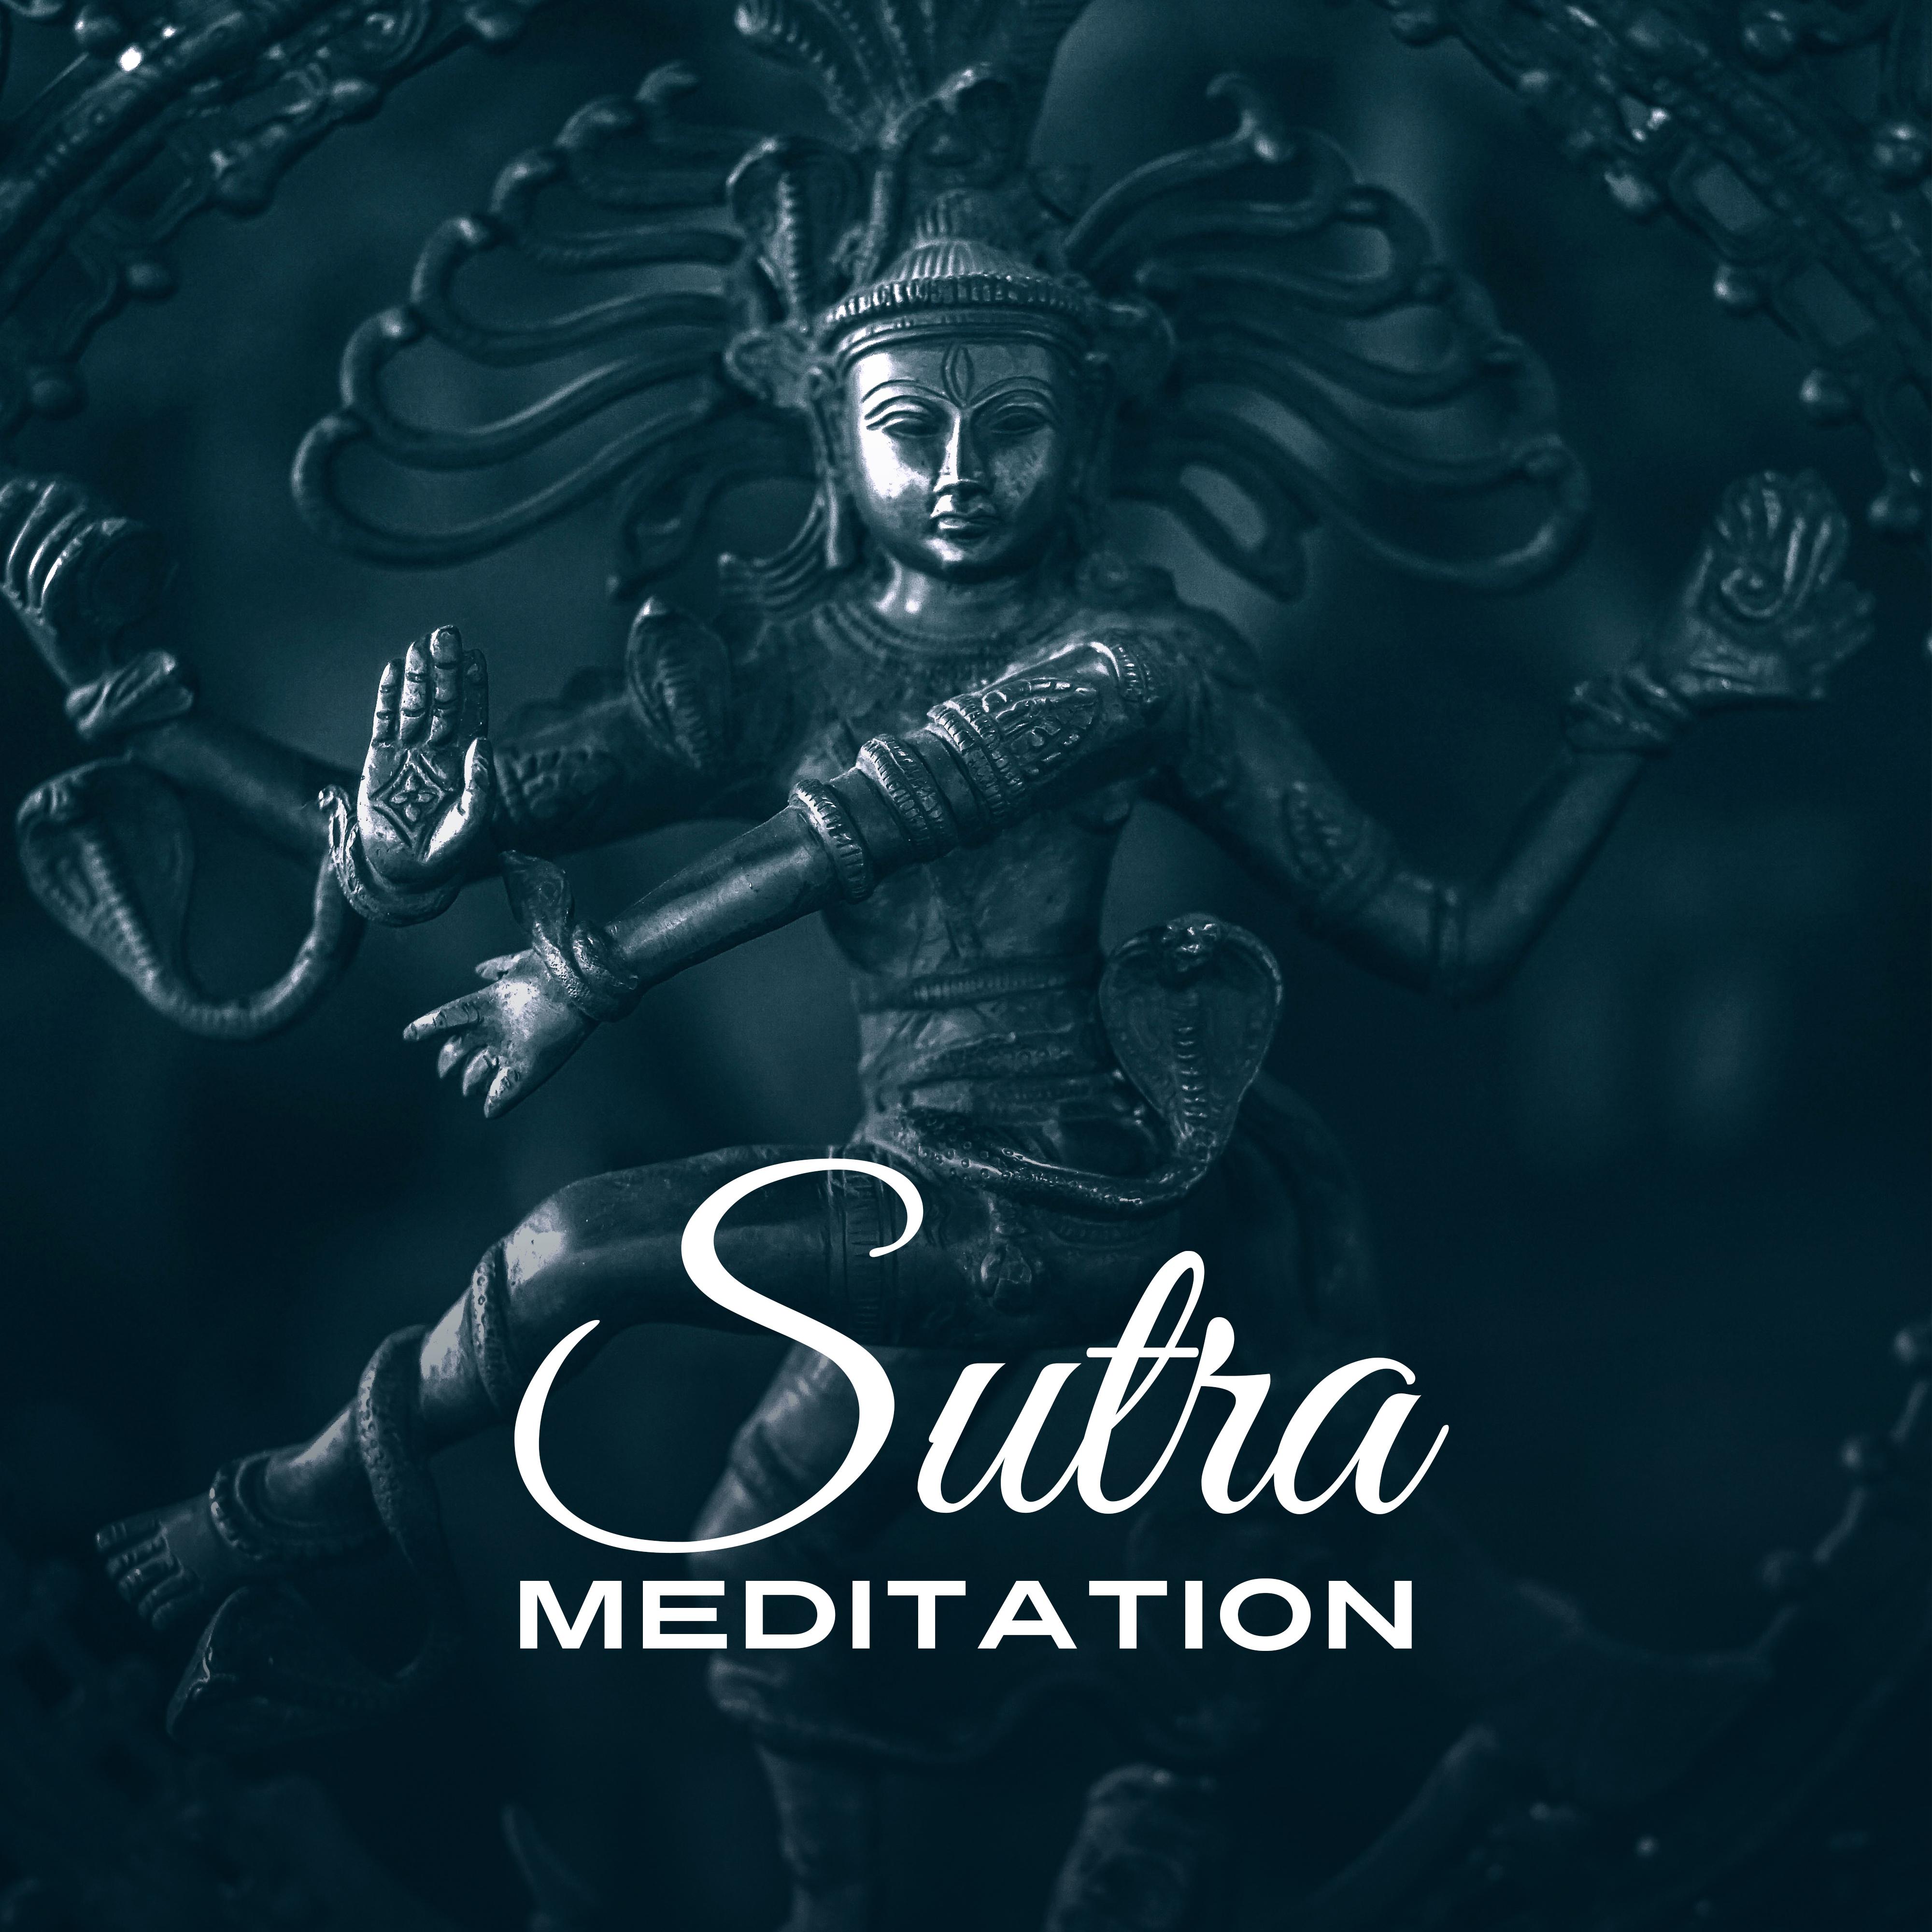 Sutra Meditation – Music for Yoga Meditation, Asian Zen, Buddha Lounge, Deep Relaxation, New Age Music 2017, Calm of Mind